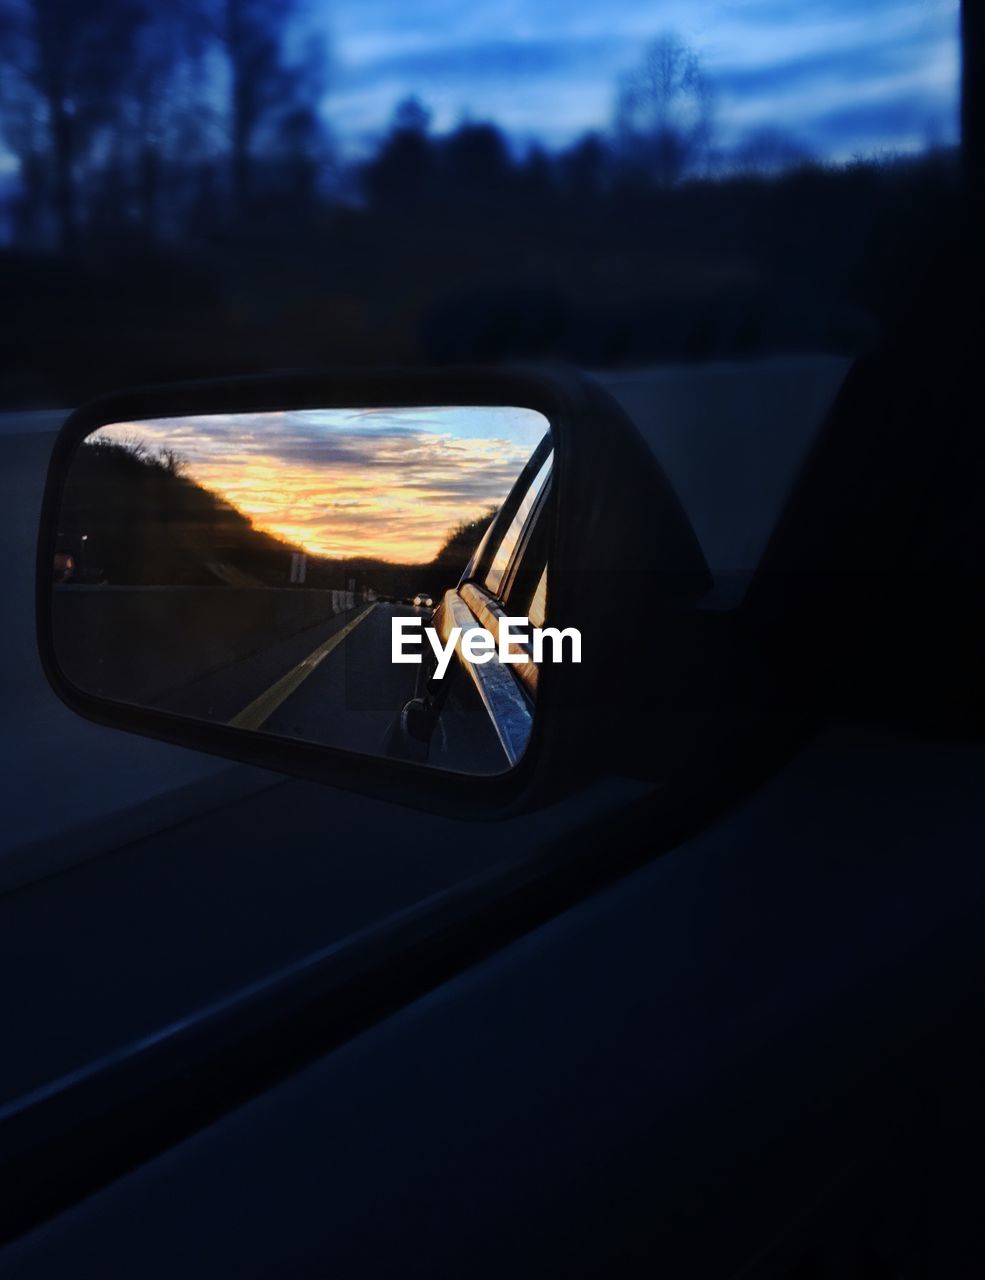 Road reflecting on side-view mirror of car during sunset